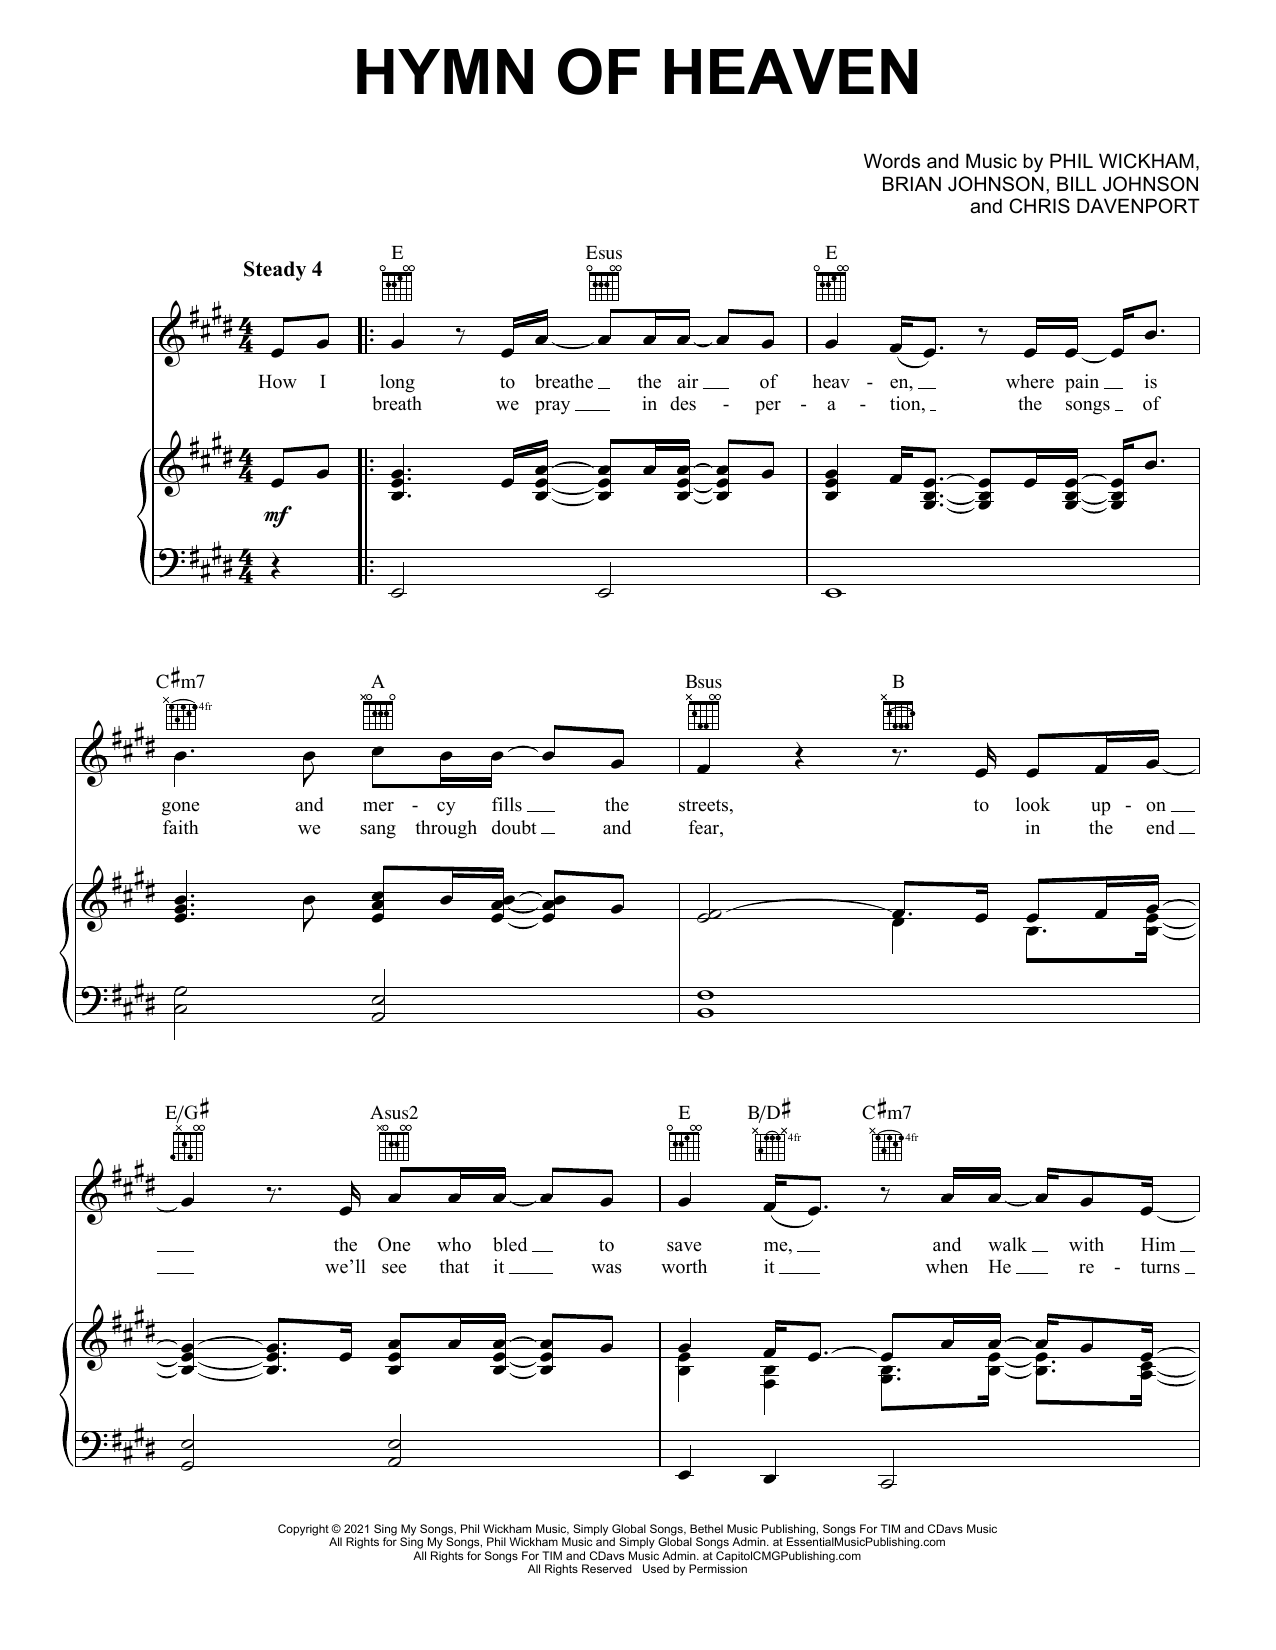 Phil Wickham Hymn Of Heaven sheet music notes and chords. Download Printable PDF.